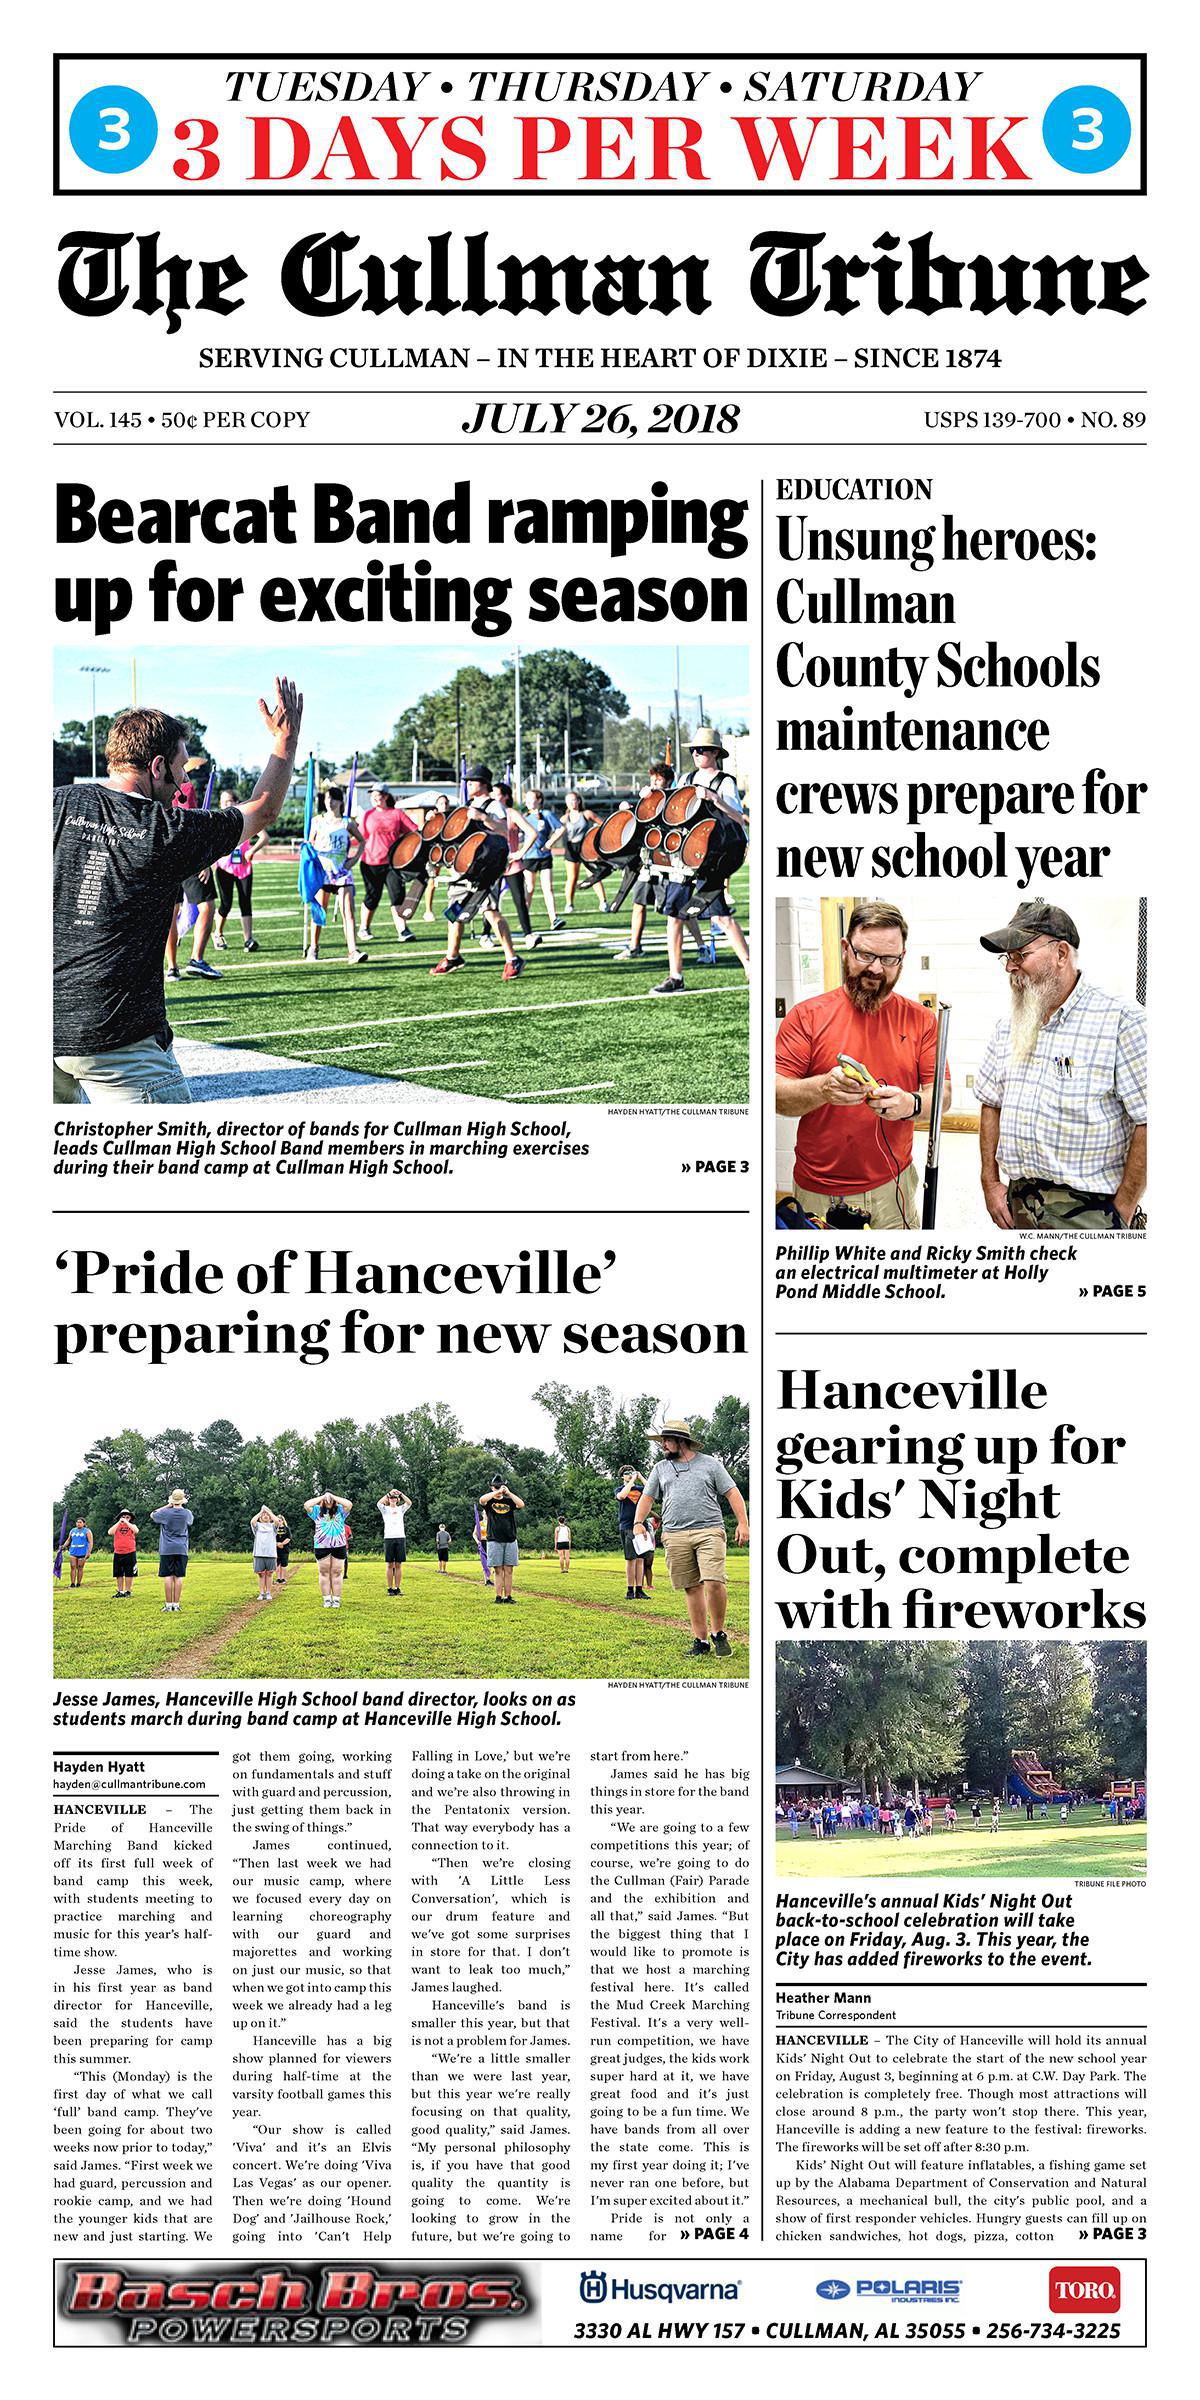 Good Morning Cullman! The 07-26-2018 edition of the Cullman Tribune is now ready to view